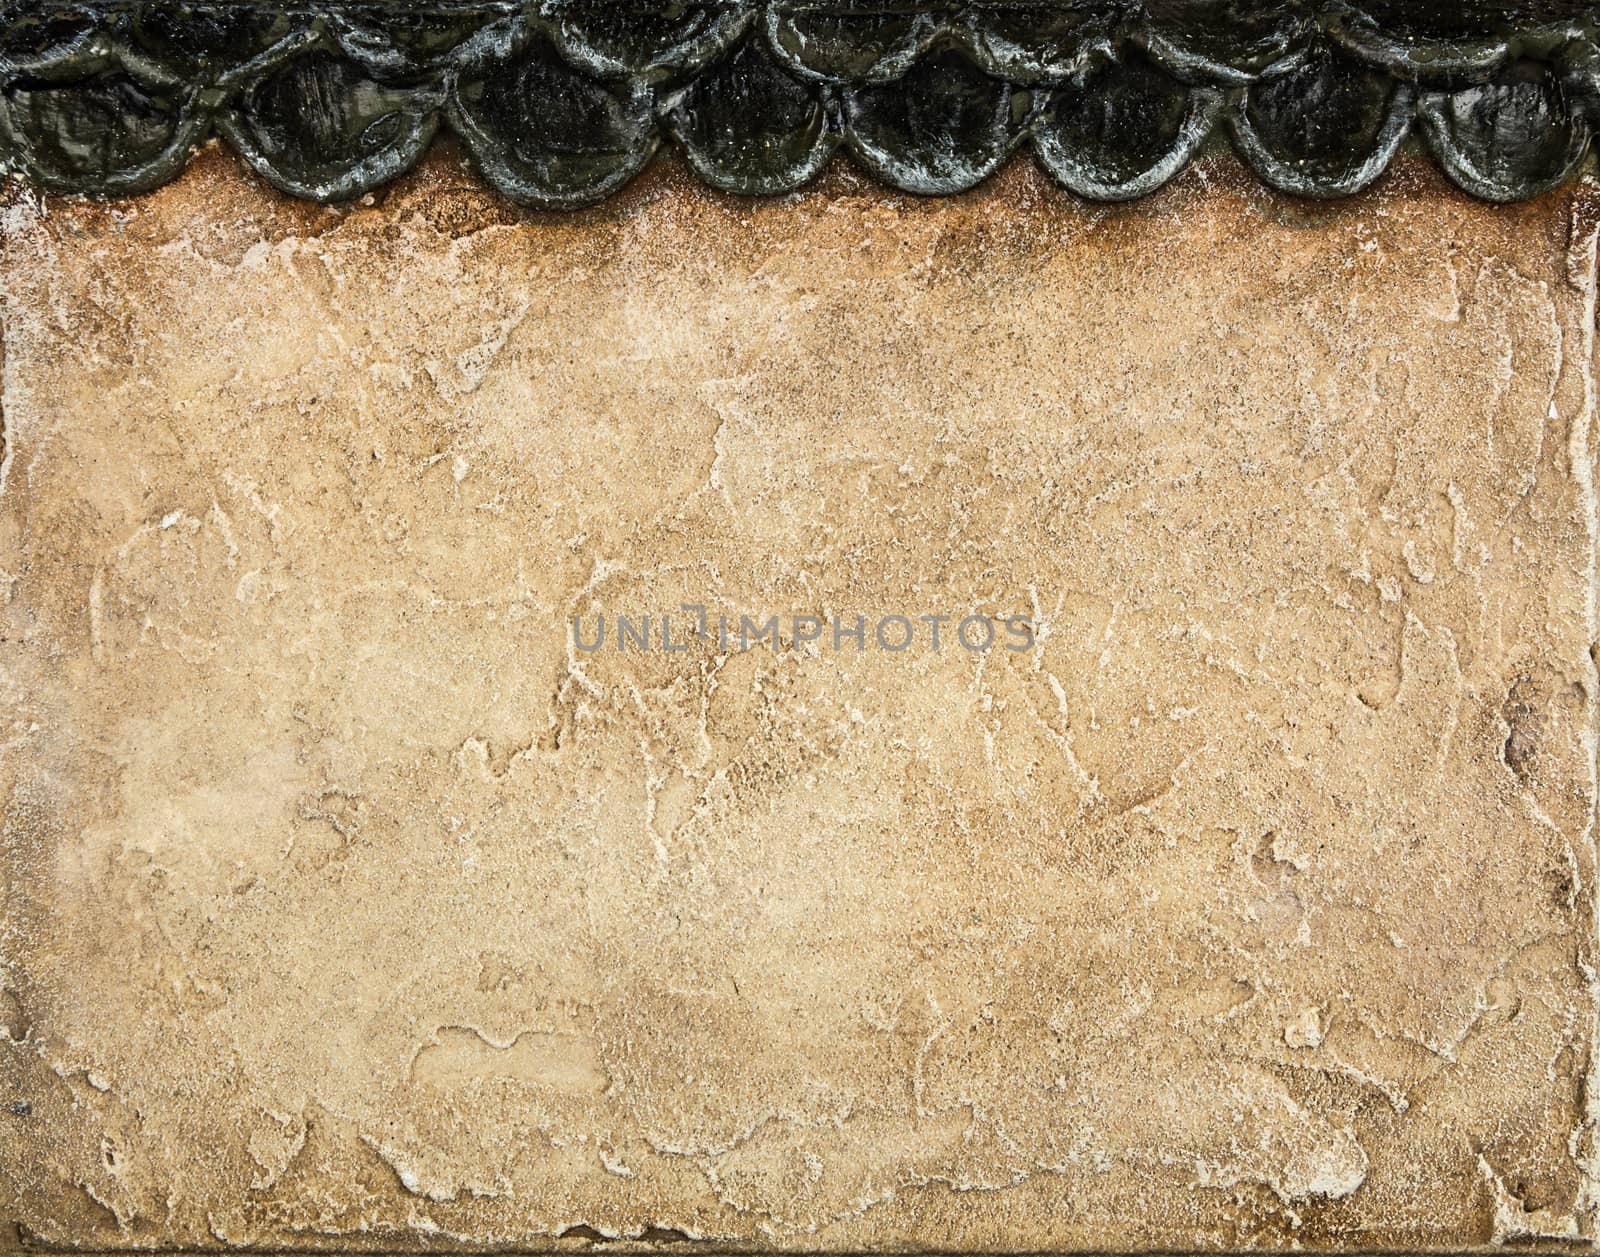 Painted textured background, grain structure of the wall